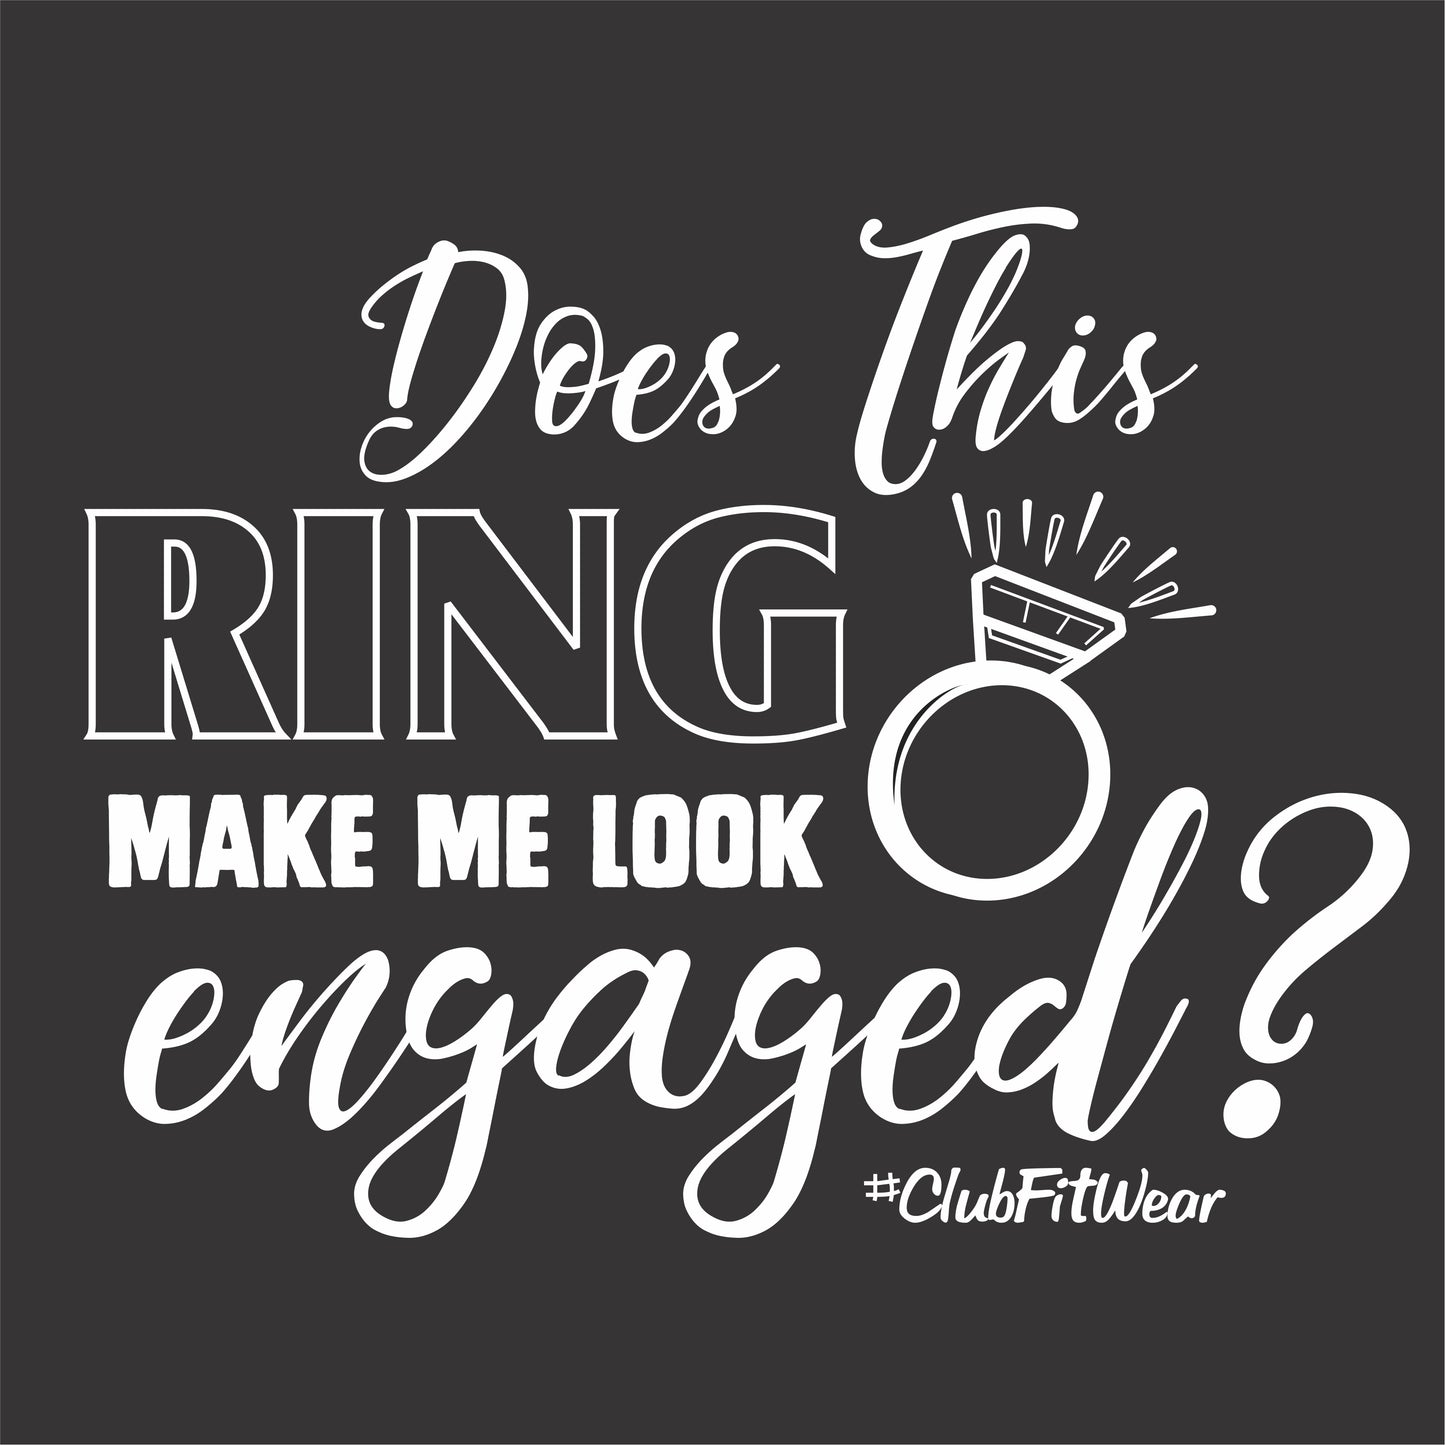 Does this Ring make me look Engaged